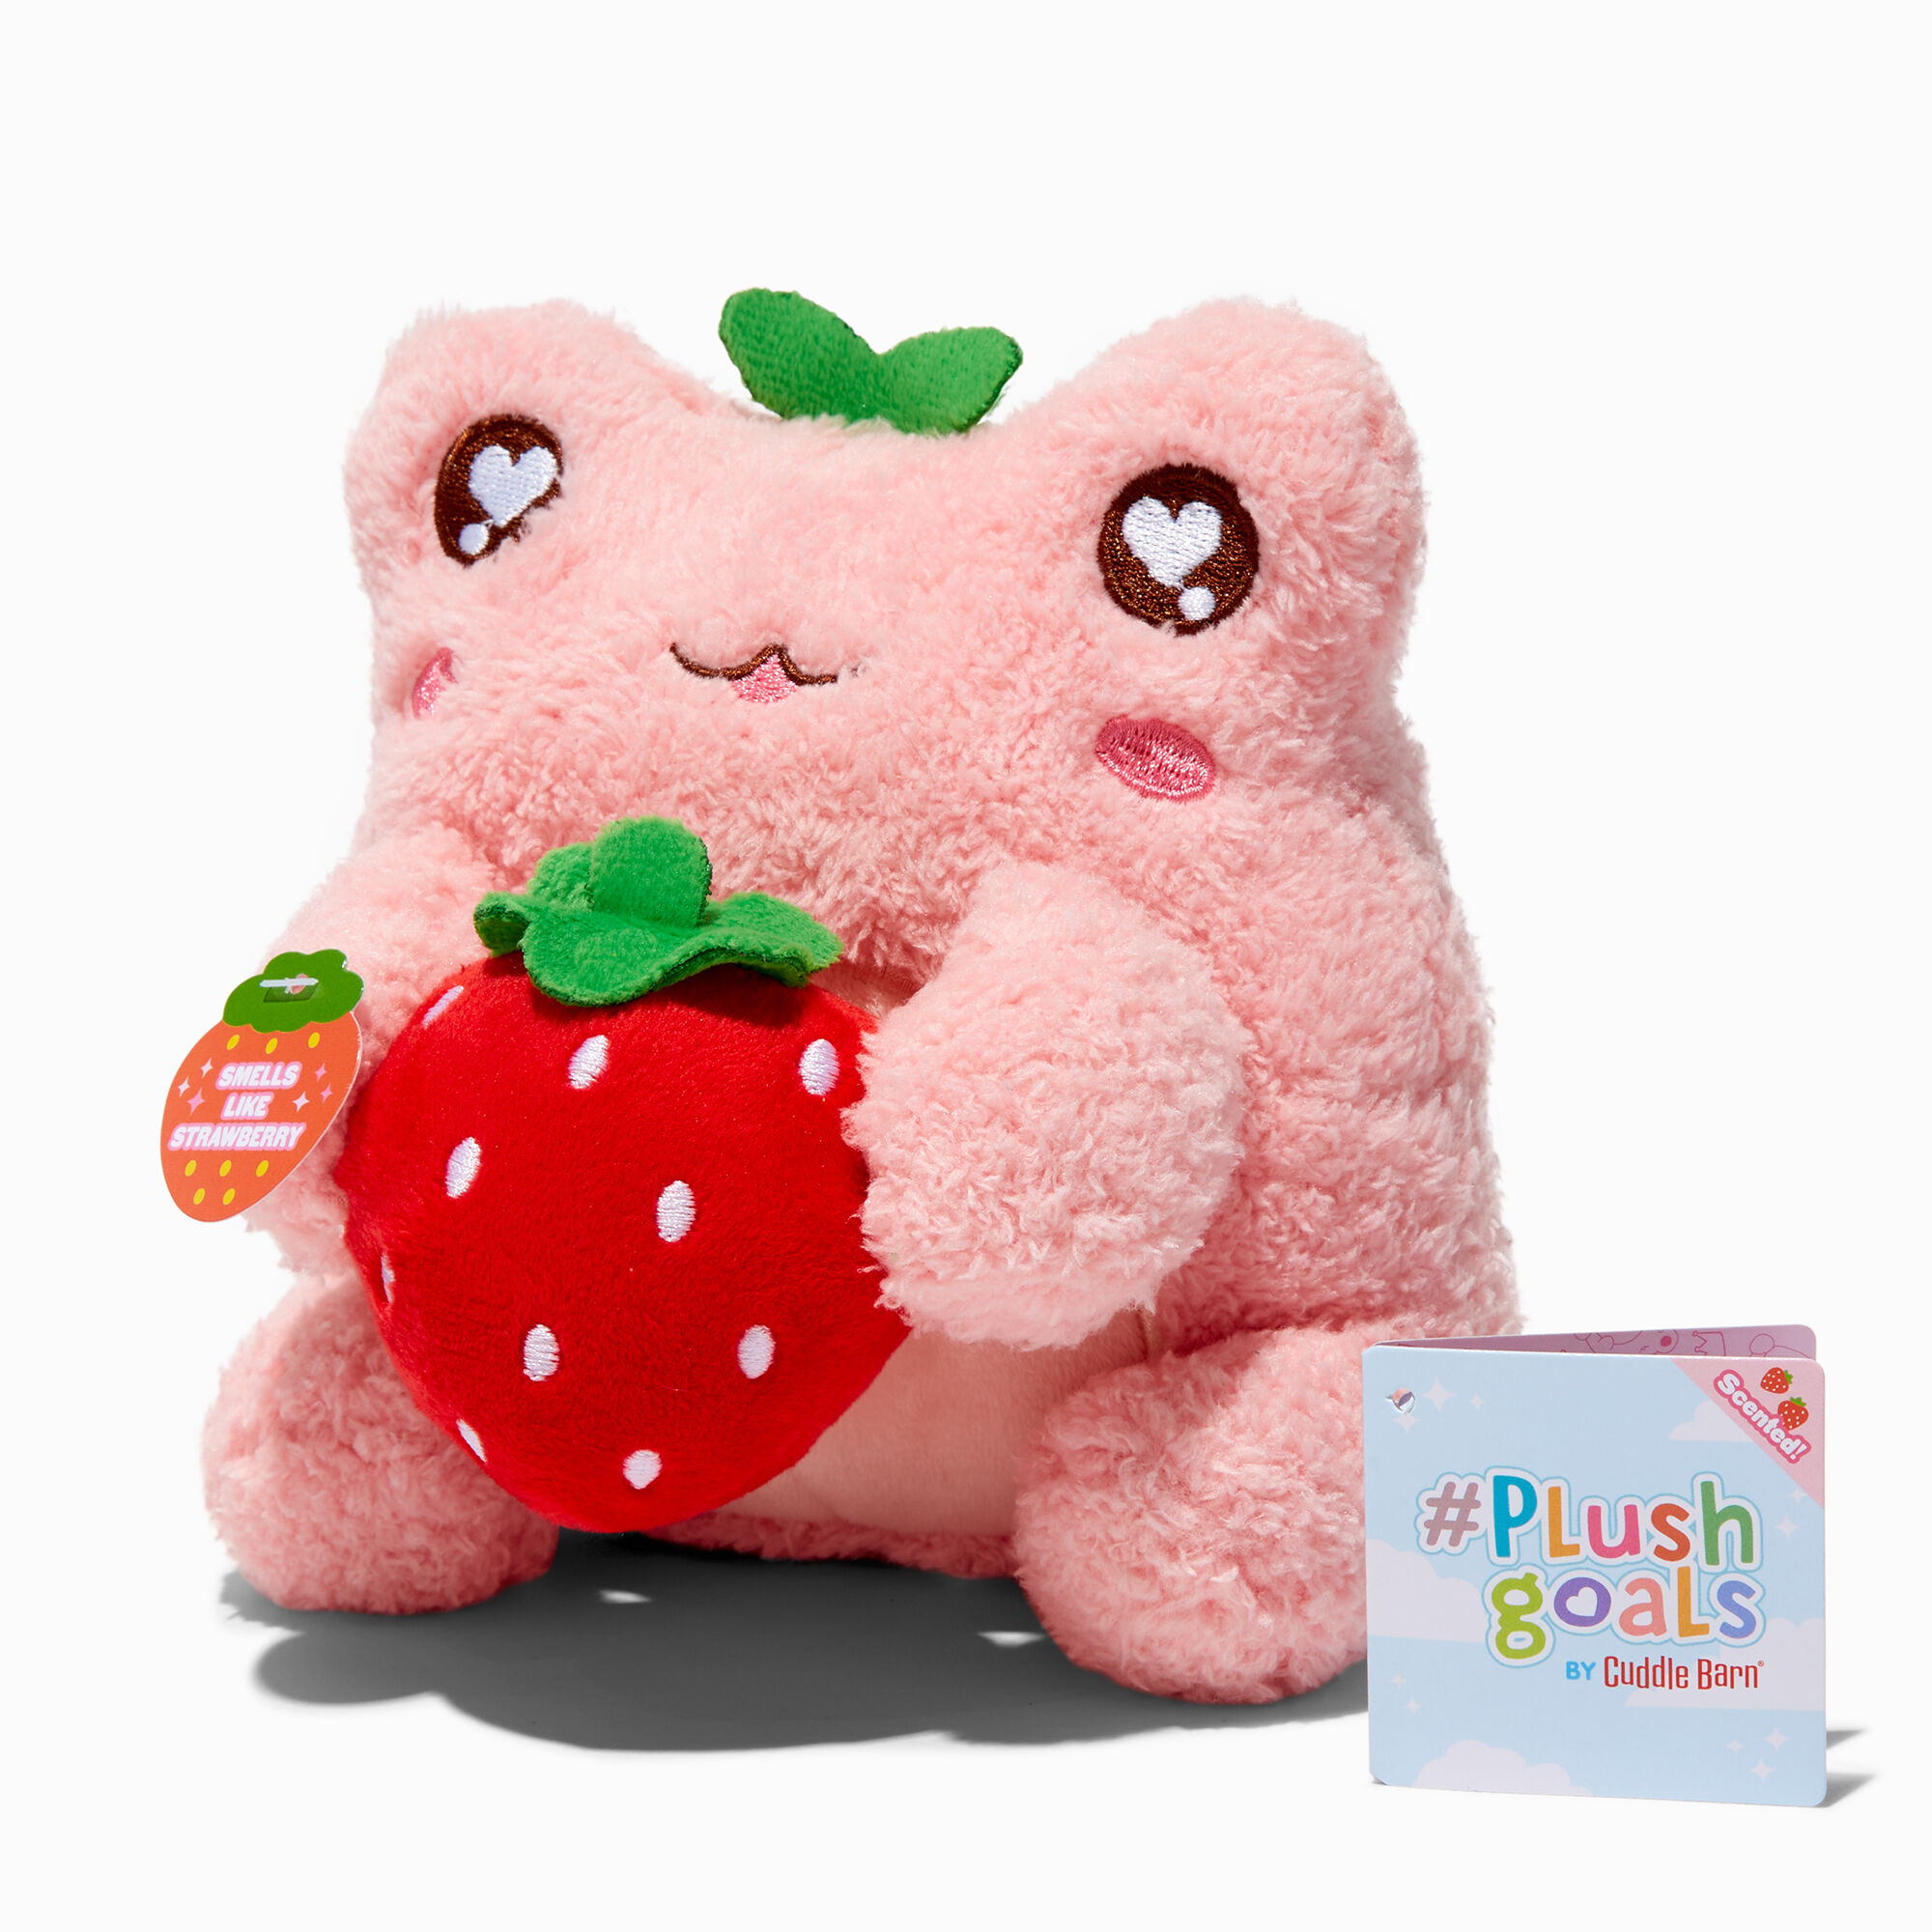 View Claires plush Goals By Cuddle Barn 6 Strawberry Wawa Soft Toy information